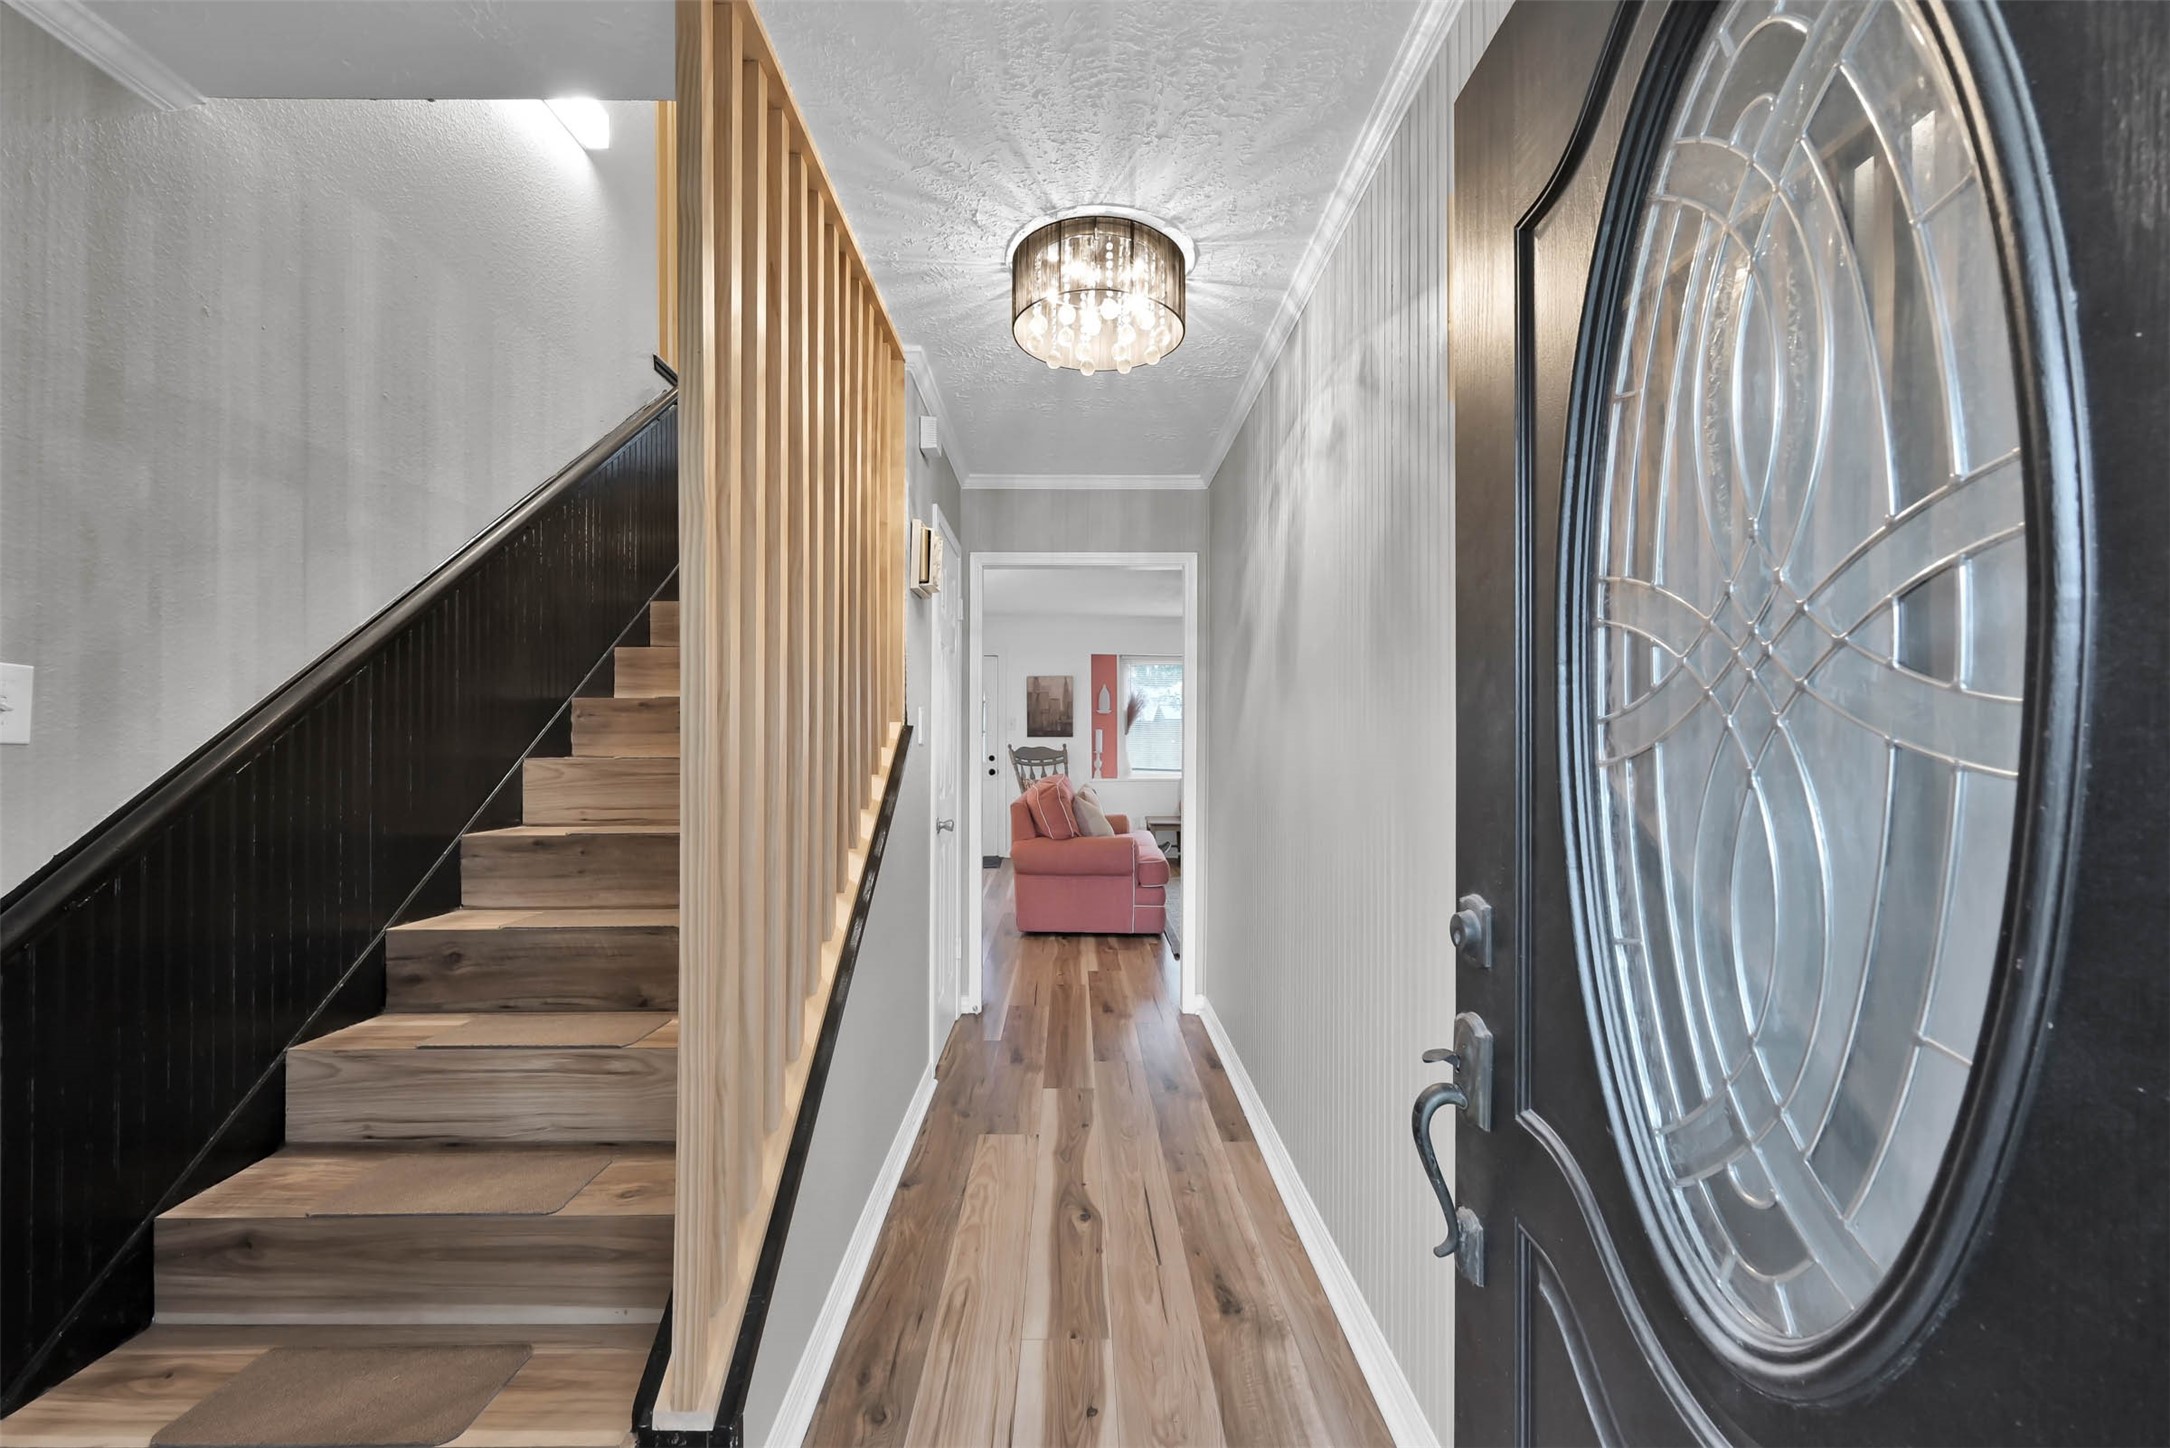 As you enter the home, you will notice the upgraded flooring throughout the first and second floors, including the staircase. The staircase and entry have bead board, a custom stair feature and upgraded light fixture.